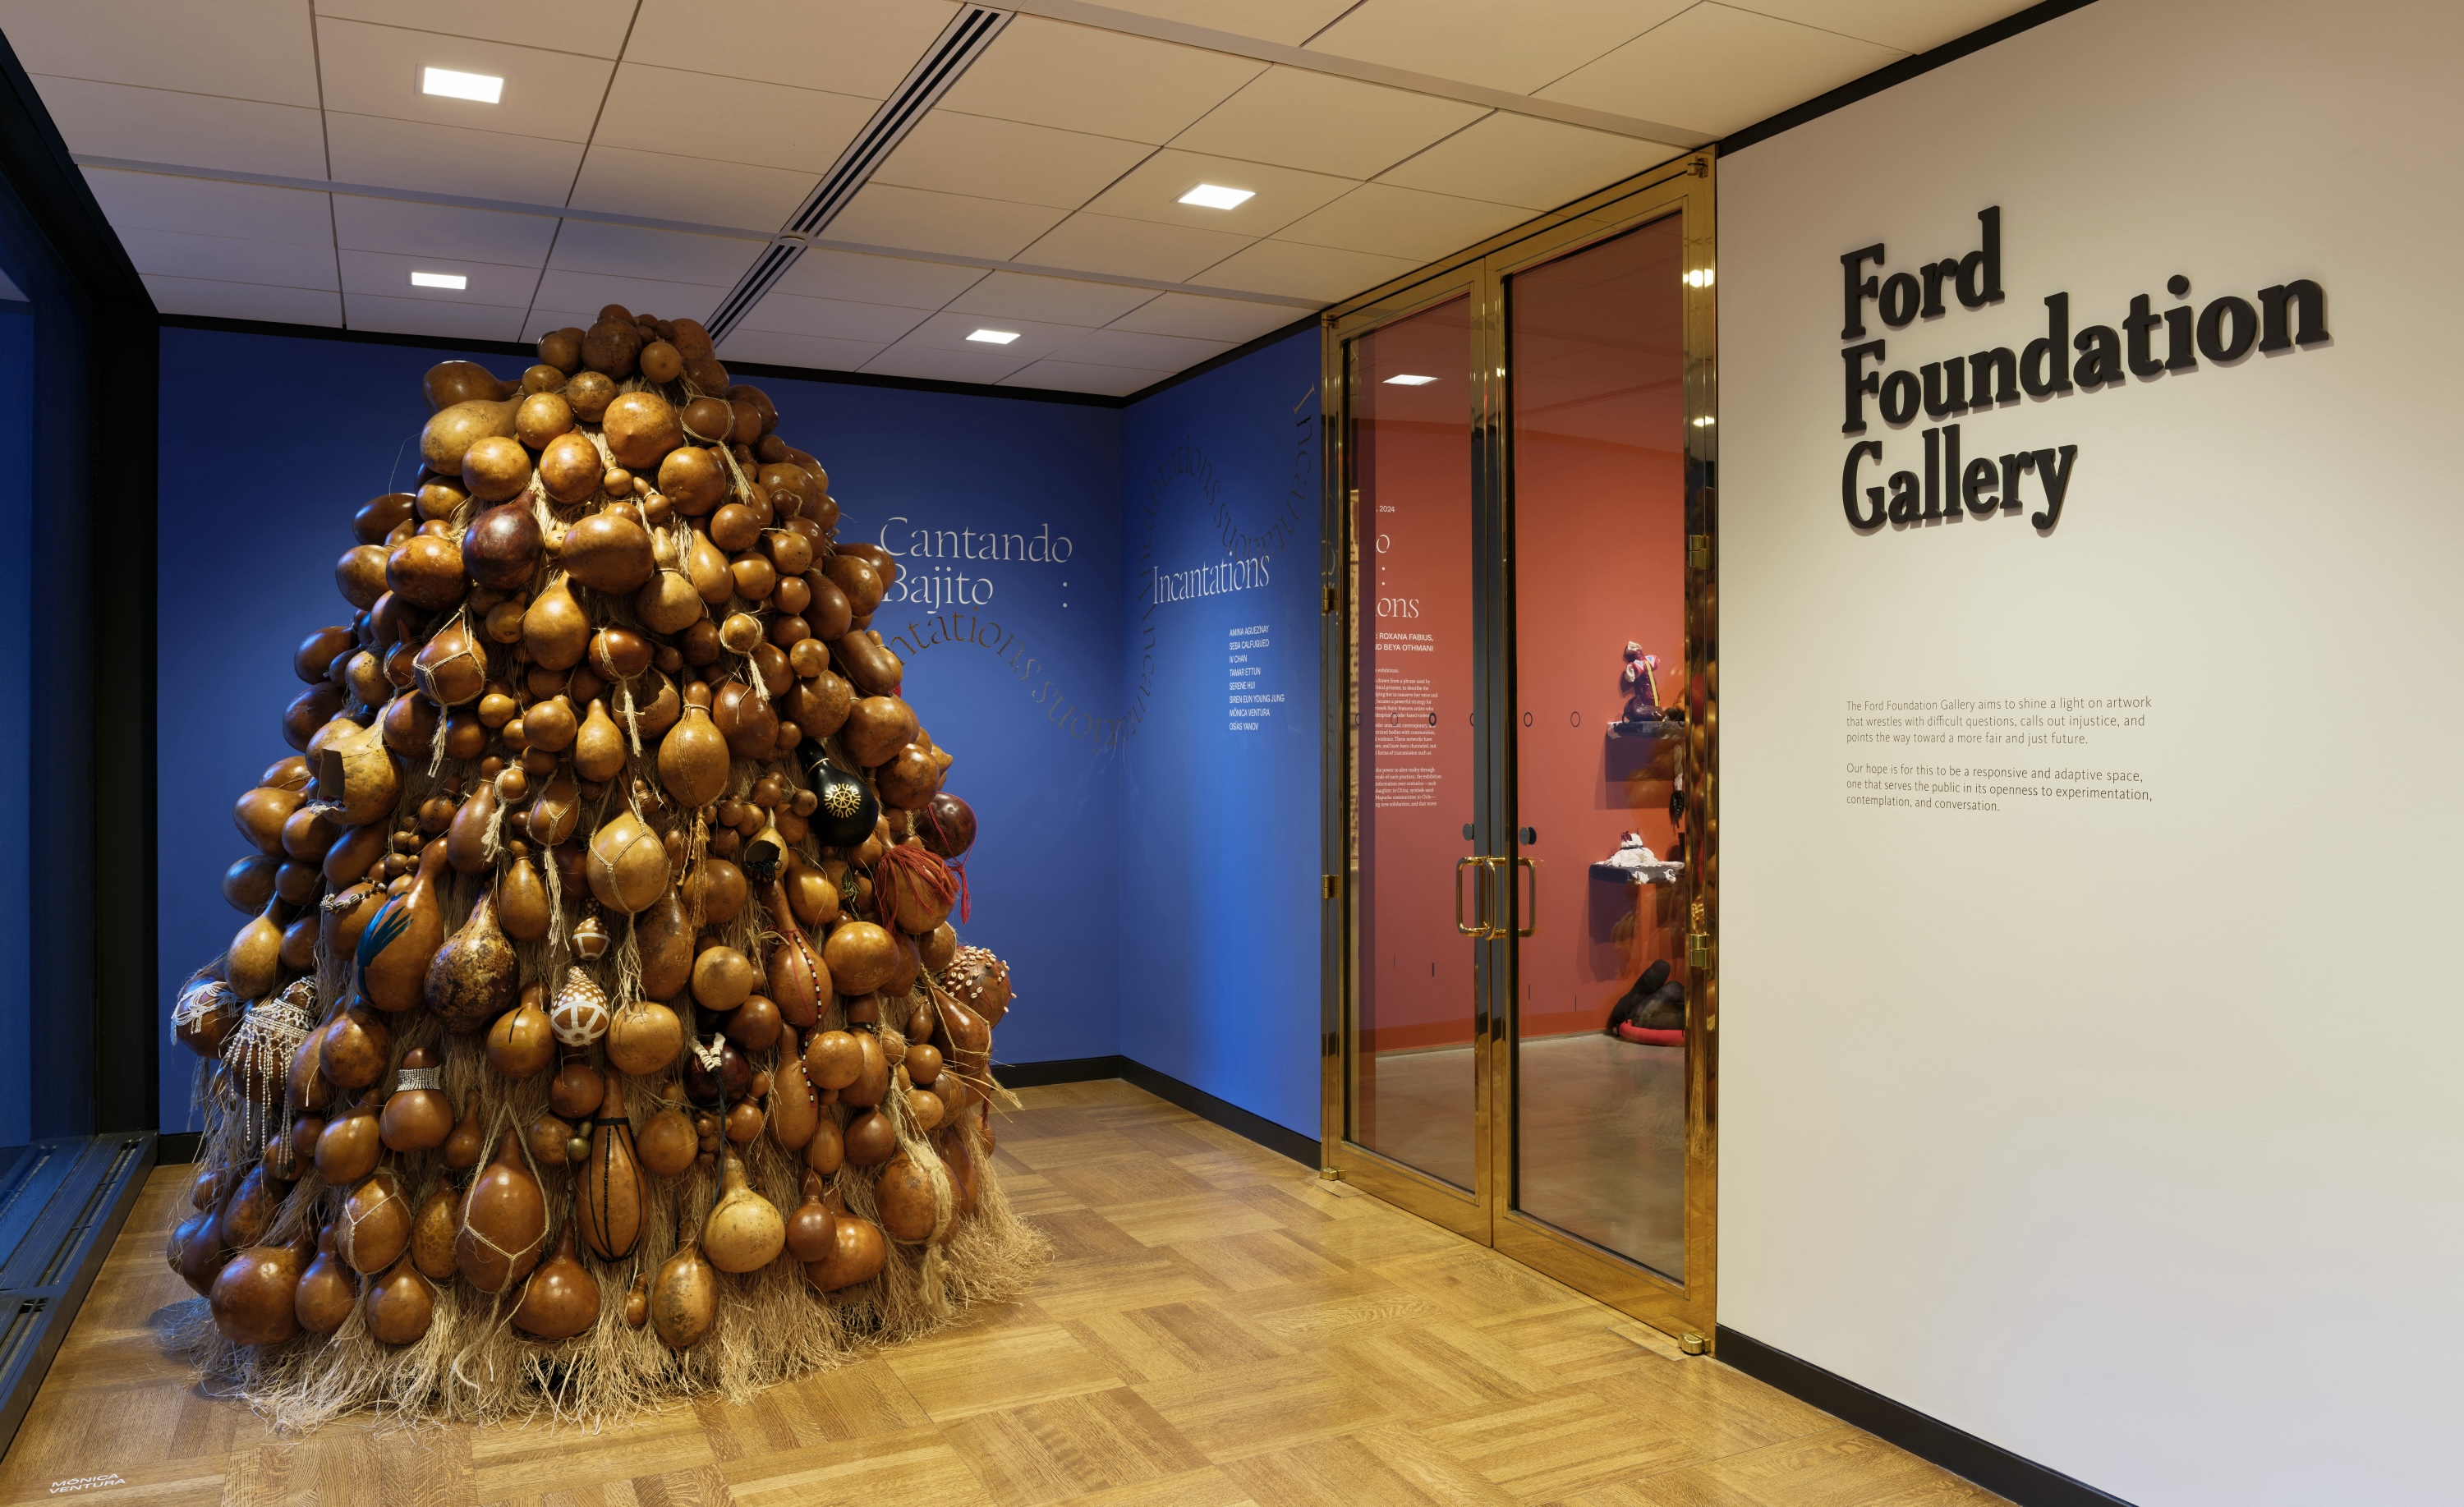 A sculptural artwork before the entrance of the Ford Foundation Gallery that stands before a blue painted wall and on top of a wood floor. The sculpture is made up of piled gourds and straw, and stands 8 feet tall.